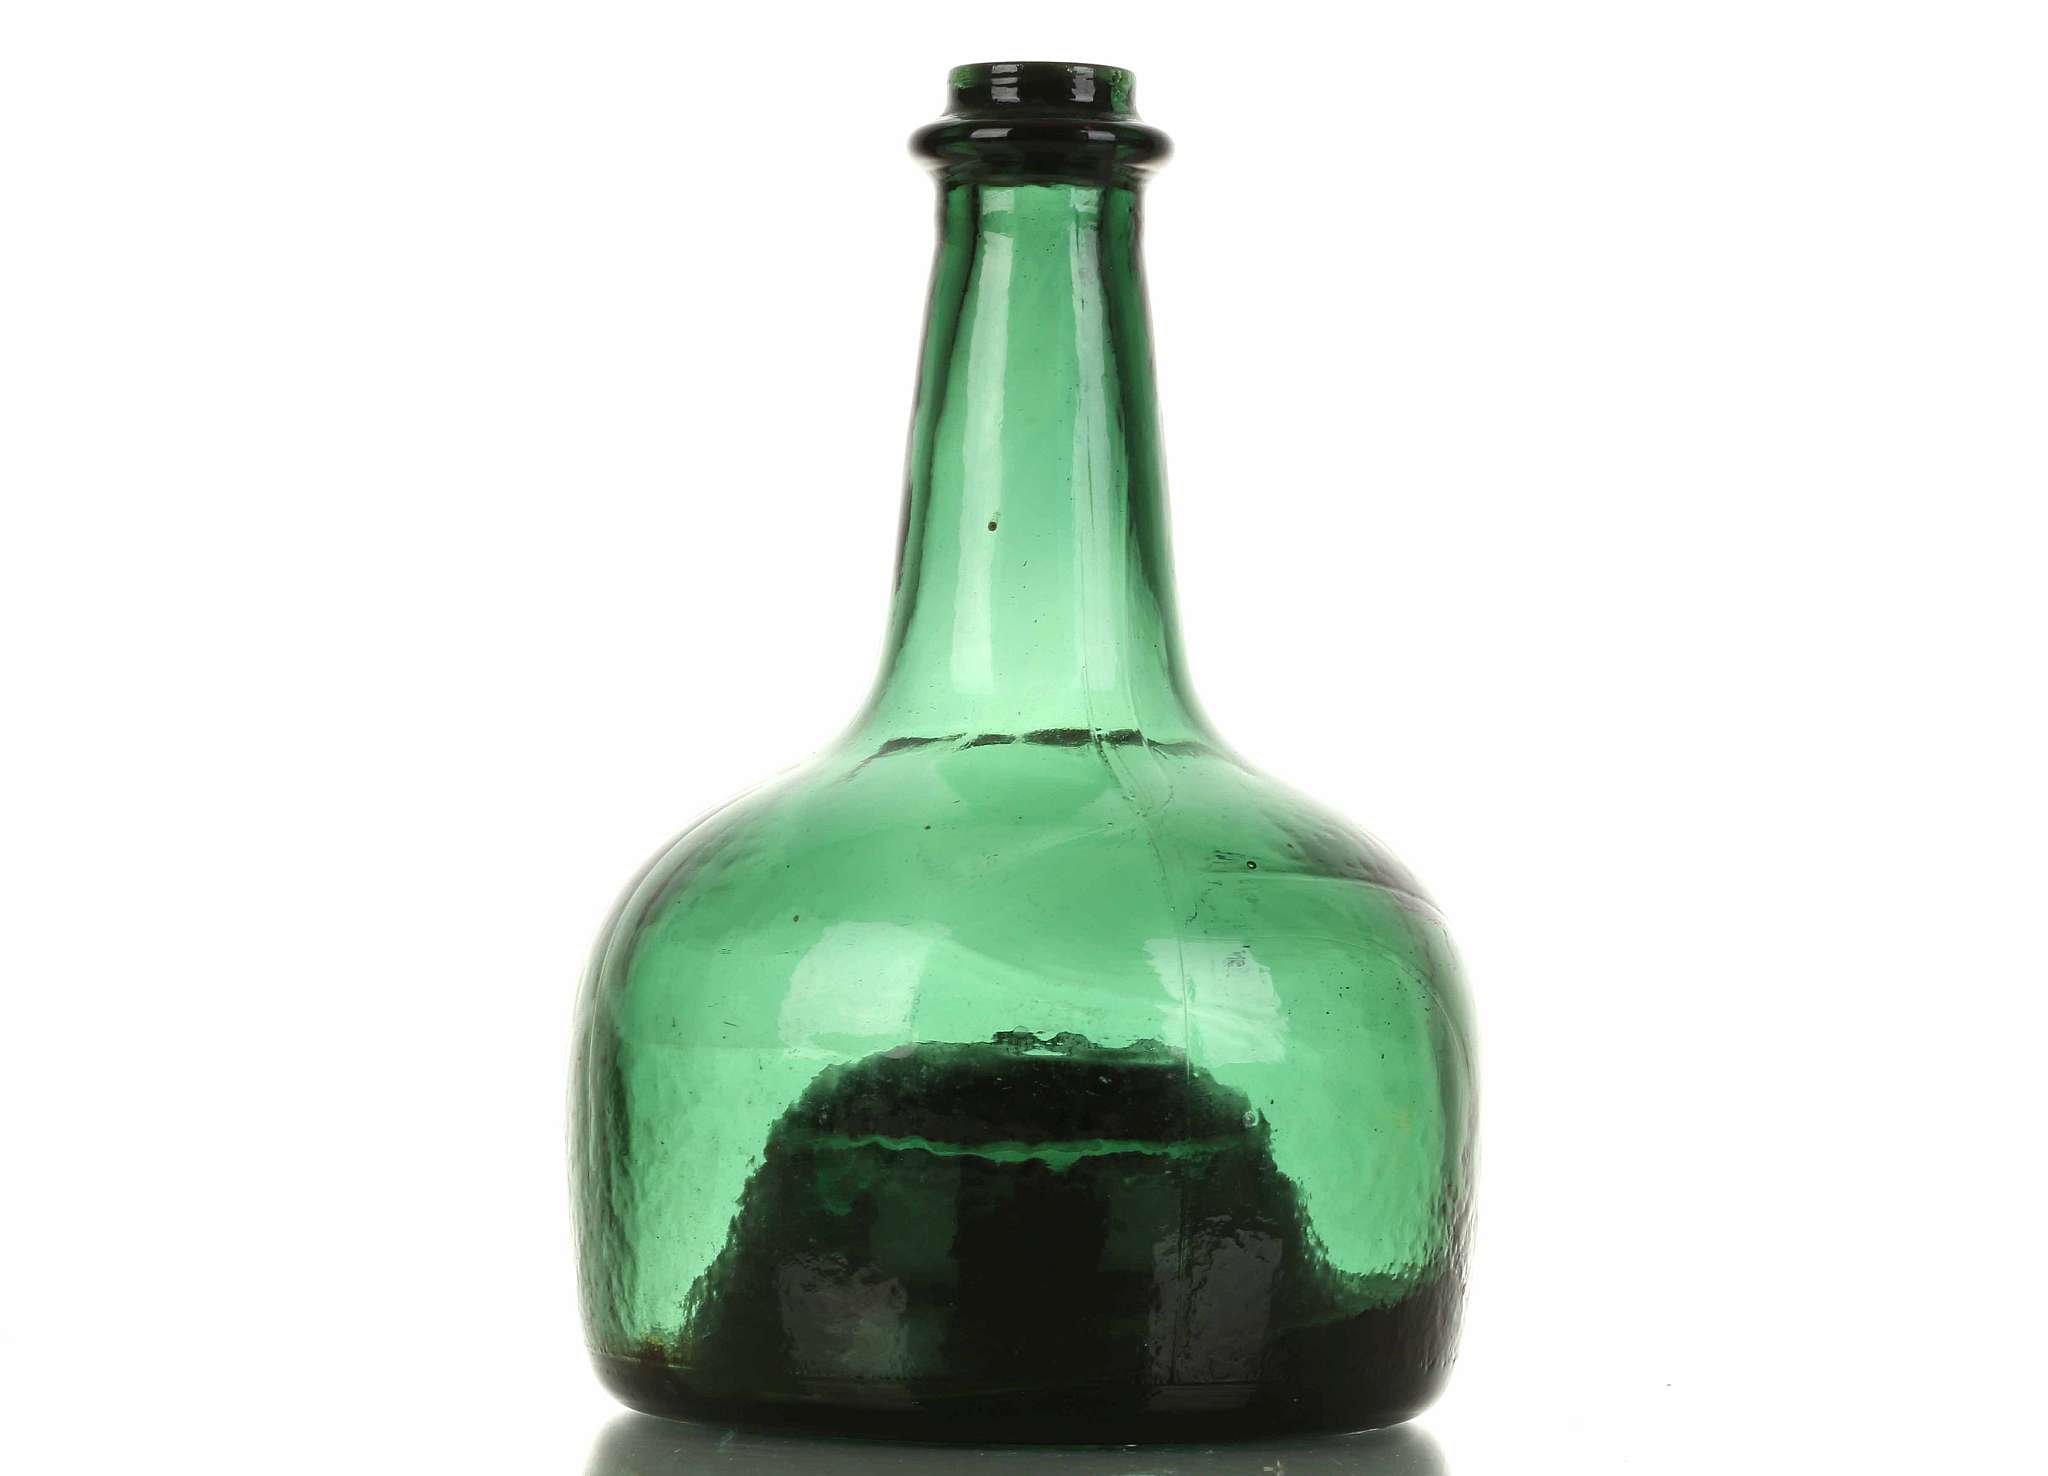 A NOVELTY GREEN GLASS MUSICAL ONION WINE BOTTLE, early 20th century, moulded in 18th century - Image 3 of 5